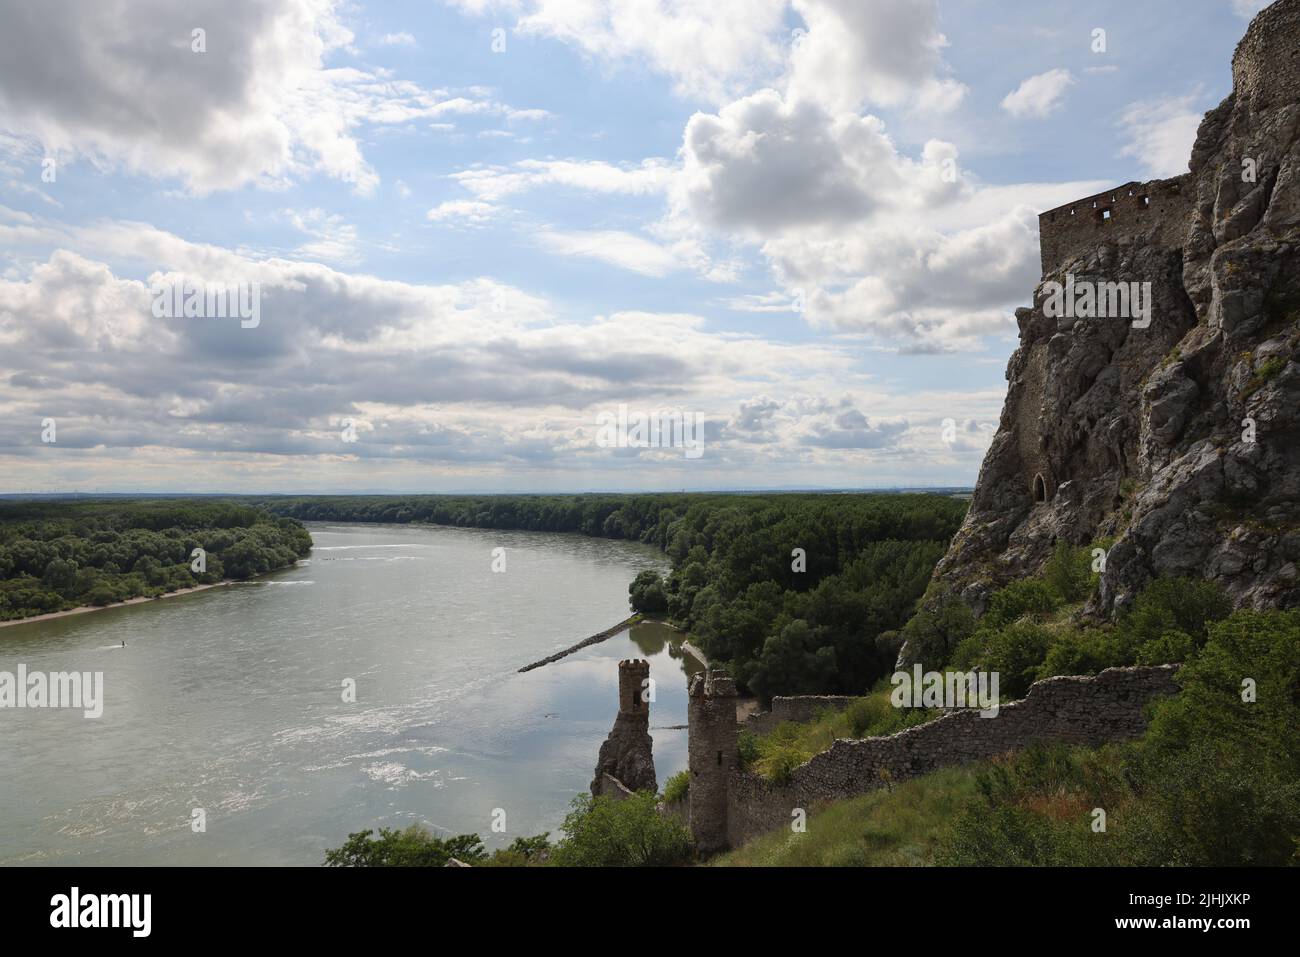 Danube river seen from the Devin castle in Slovakia, part of which is visible including the Maiden tower (Mníška) and Austria at the other side Stock Photo